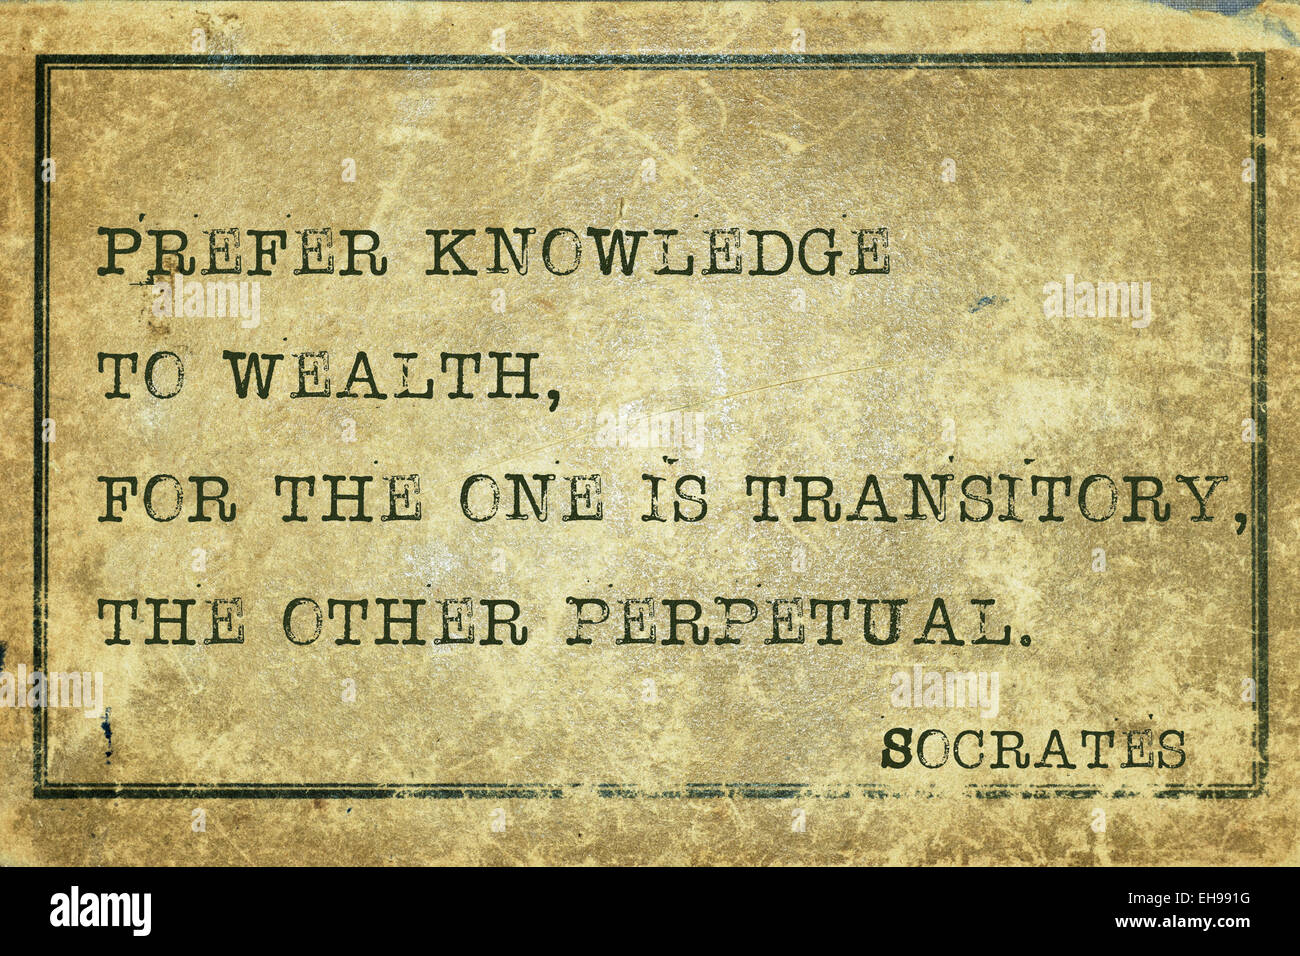 Prefer knowledge to wealth - ancient Greek philosopher Socrates quote printed on grunge vintage cardboard Stock Photo